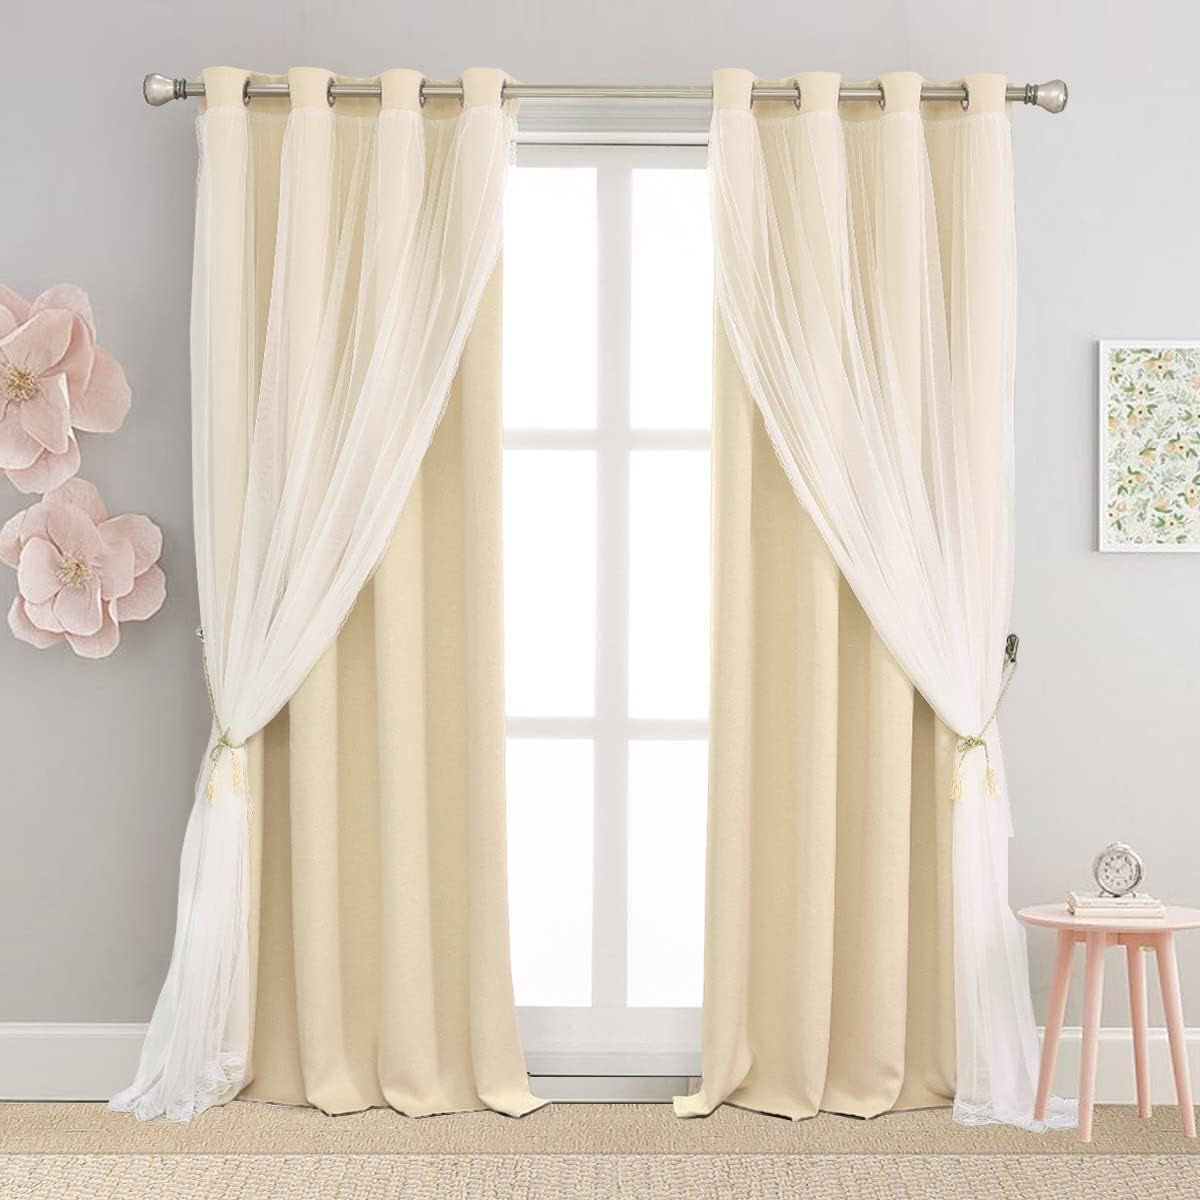 Pink Blackout Curtains 84 Inch Length - Double Layers Princess Girls Curtains & Draperies Panels for Kids Bedroom Living Room Nursery Pink Lace Hem Room Darkening Curtains, 2 Pcs  SOFJAGETQ Biscotti Beige 52 X 54 